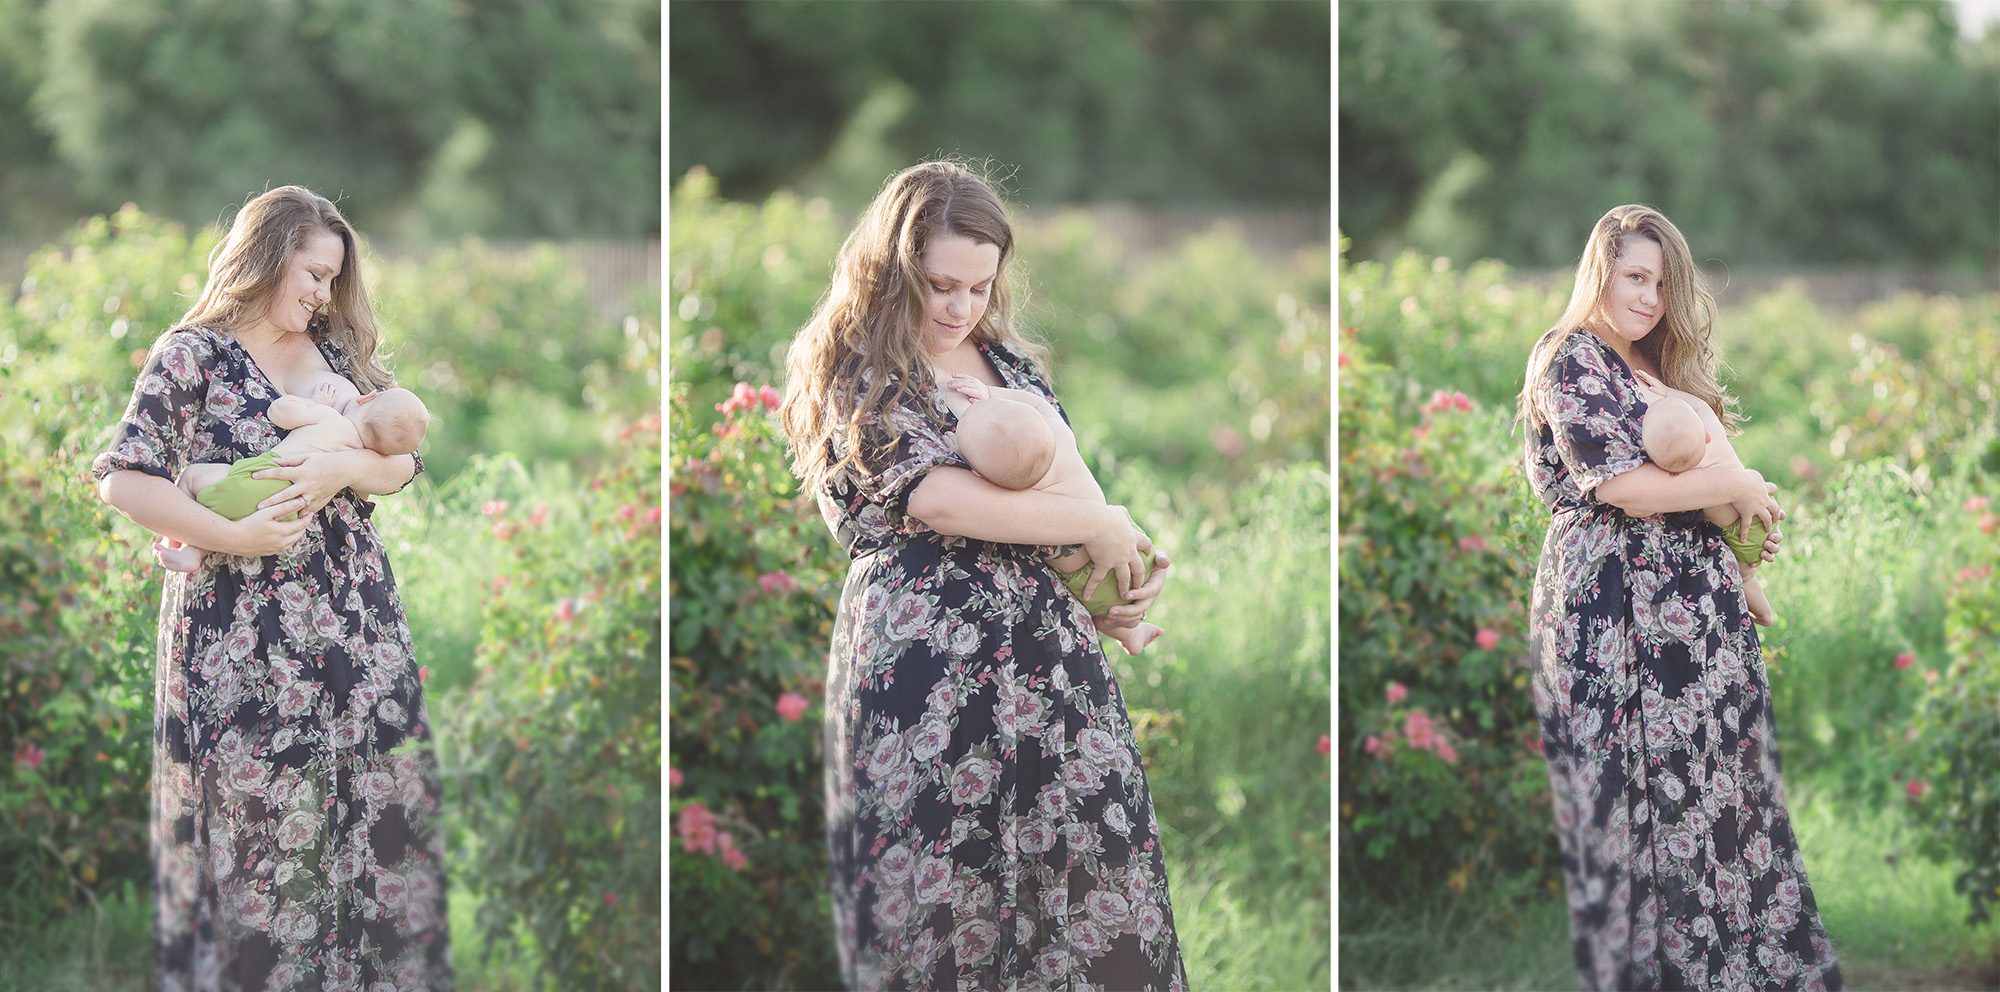 A breastfeeding session with breastfeeding photographer Belle Vie Photography at Tucson's Reid Park rose garden